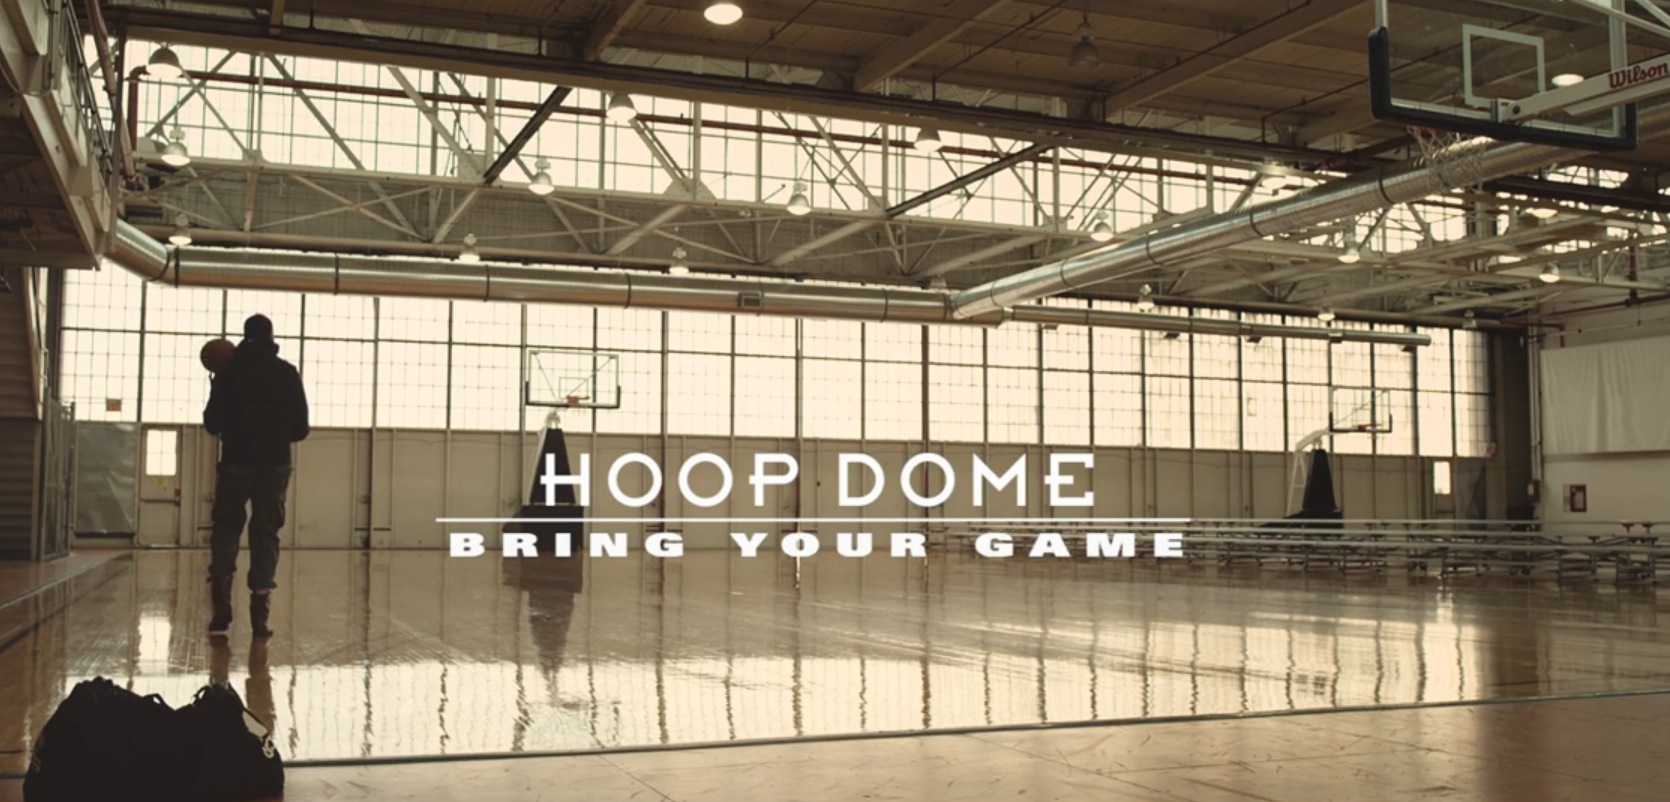 Hoop Dome - Bring you Game7